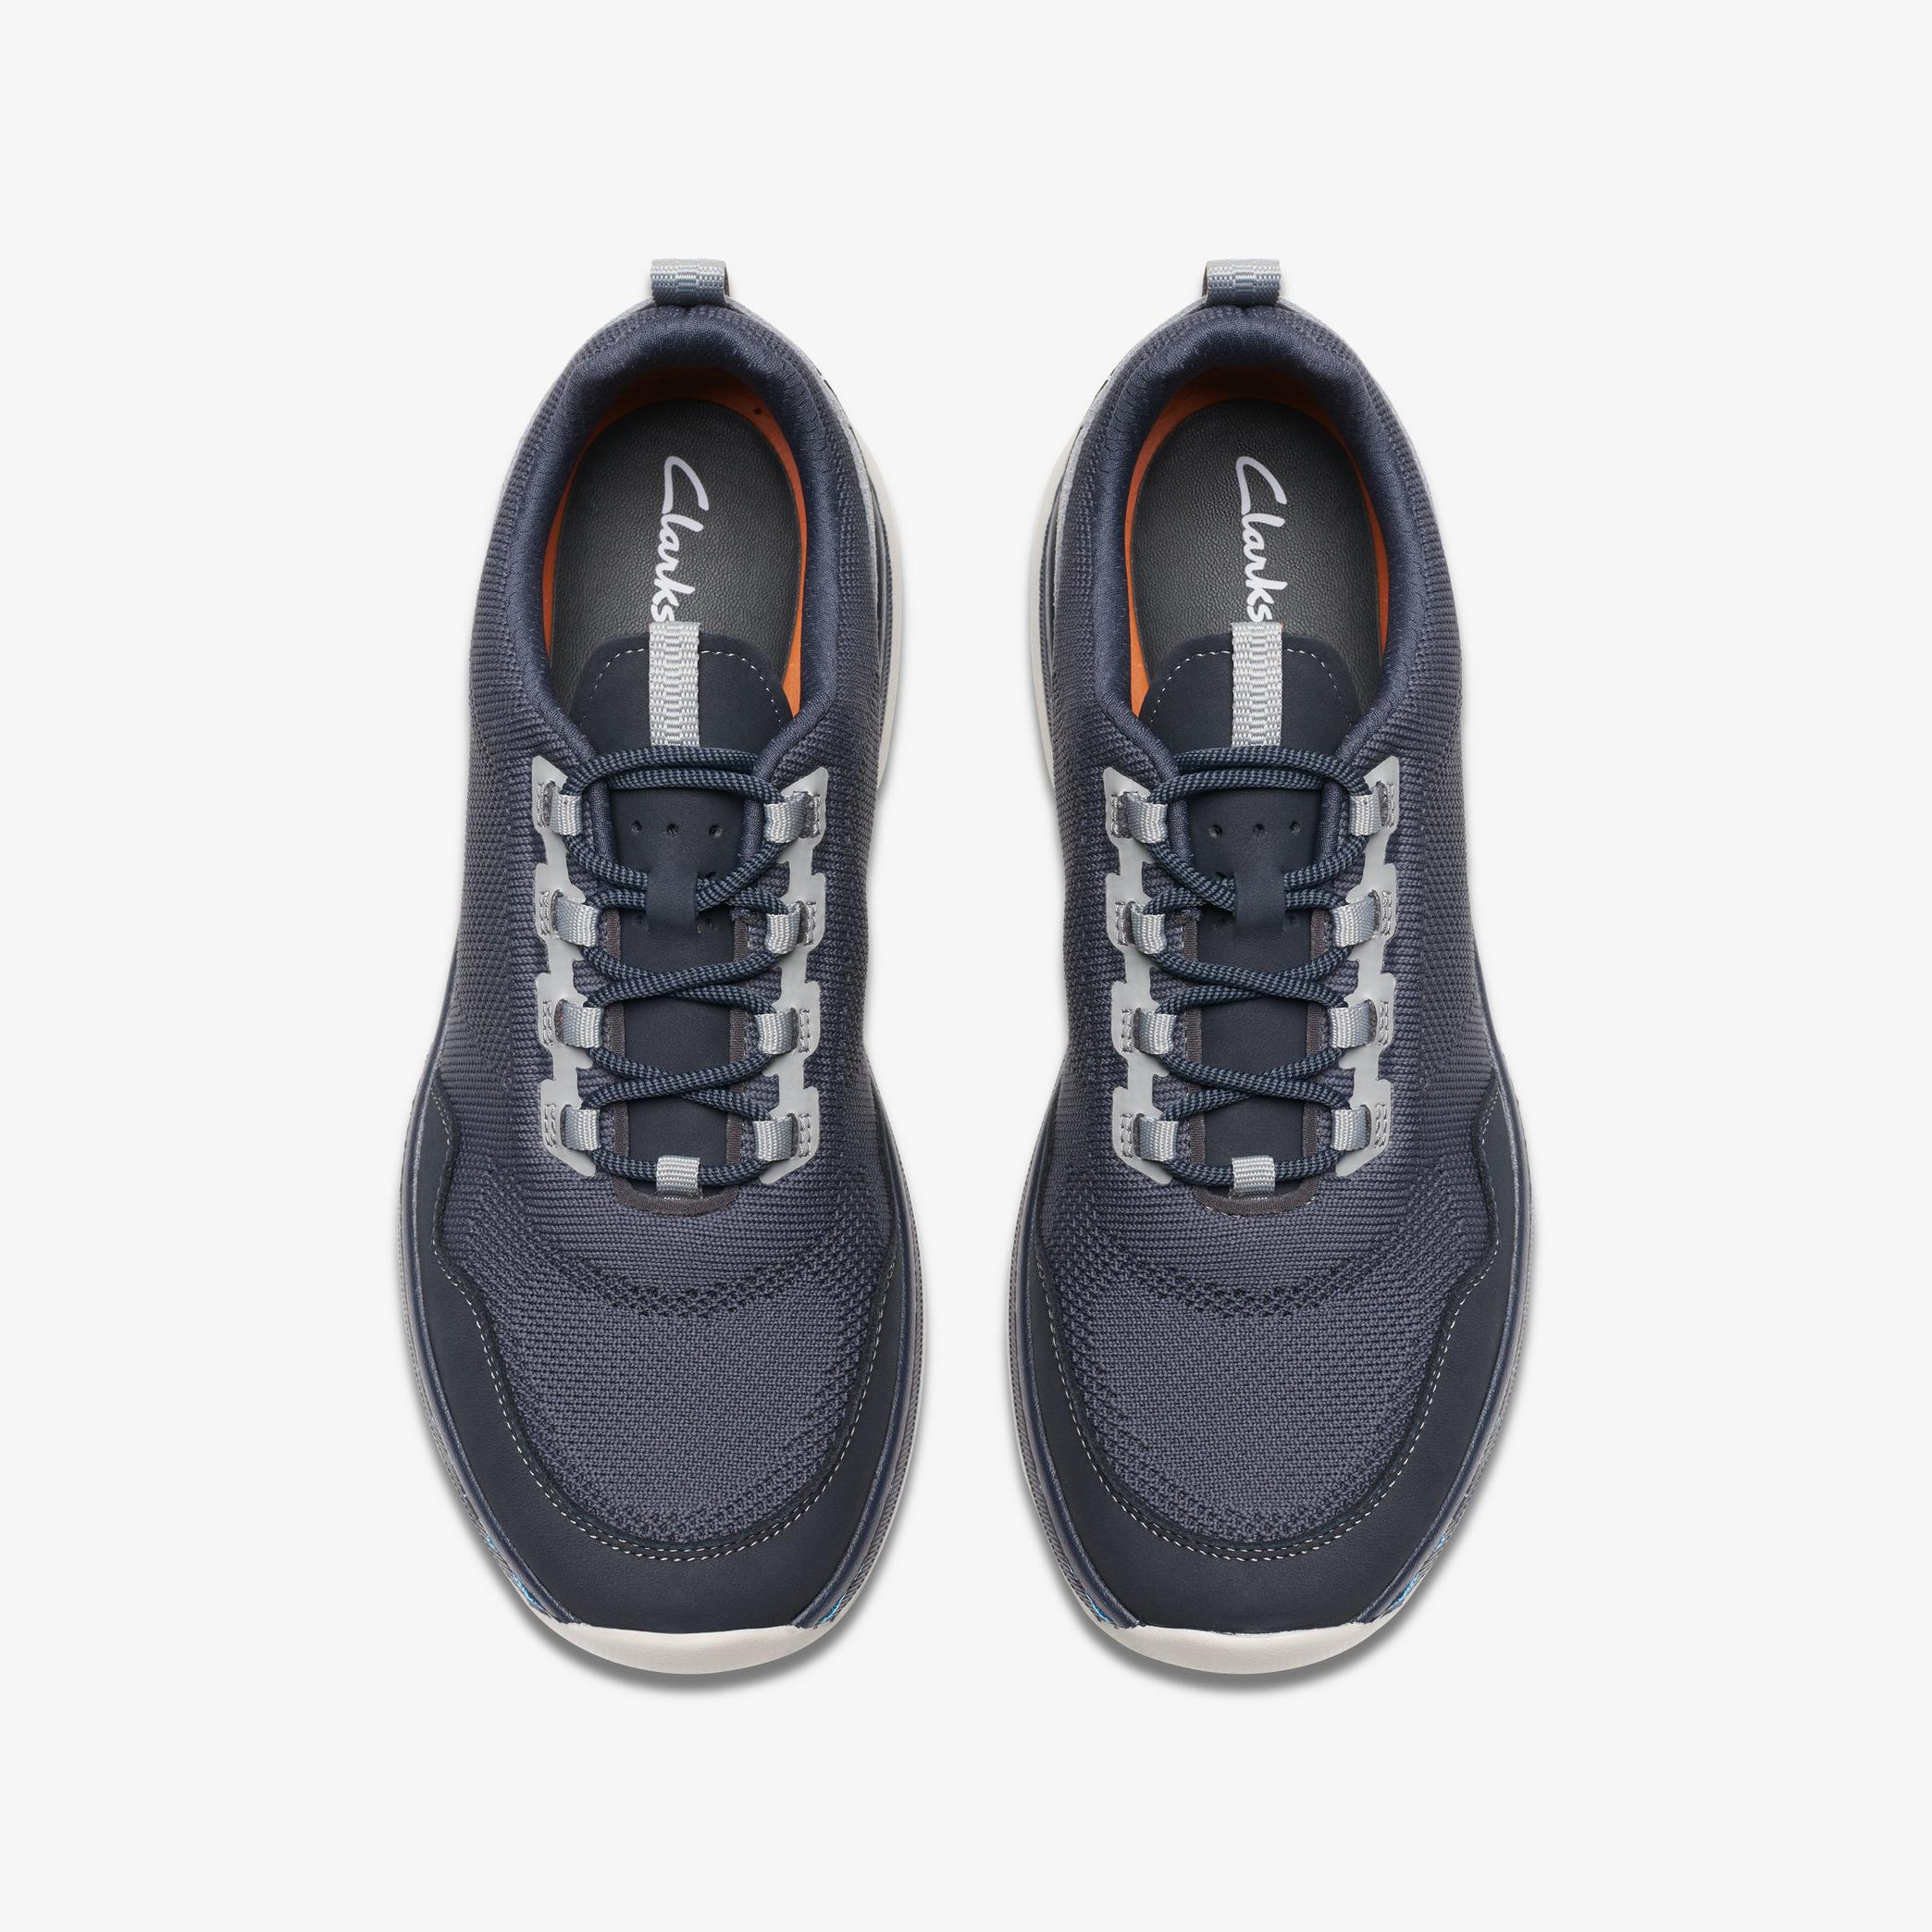 Clarks Pro Knit Navy Combination Sneakers, view 6 of 6